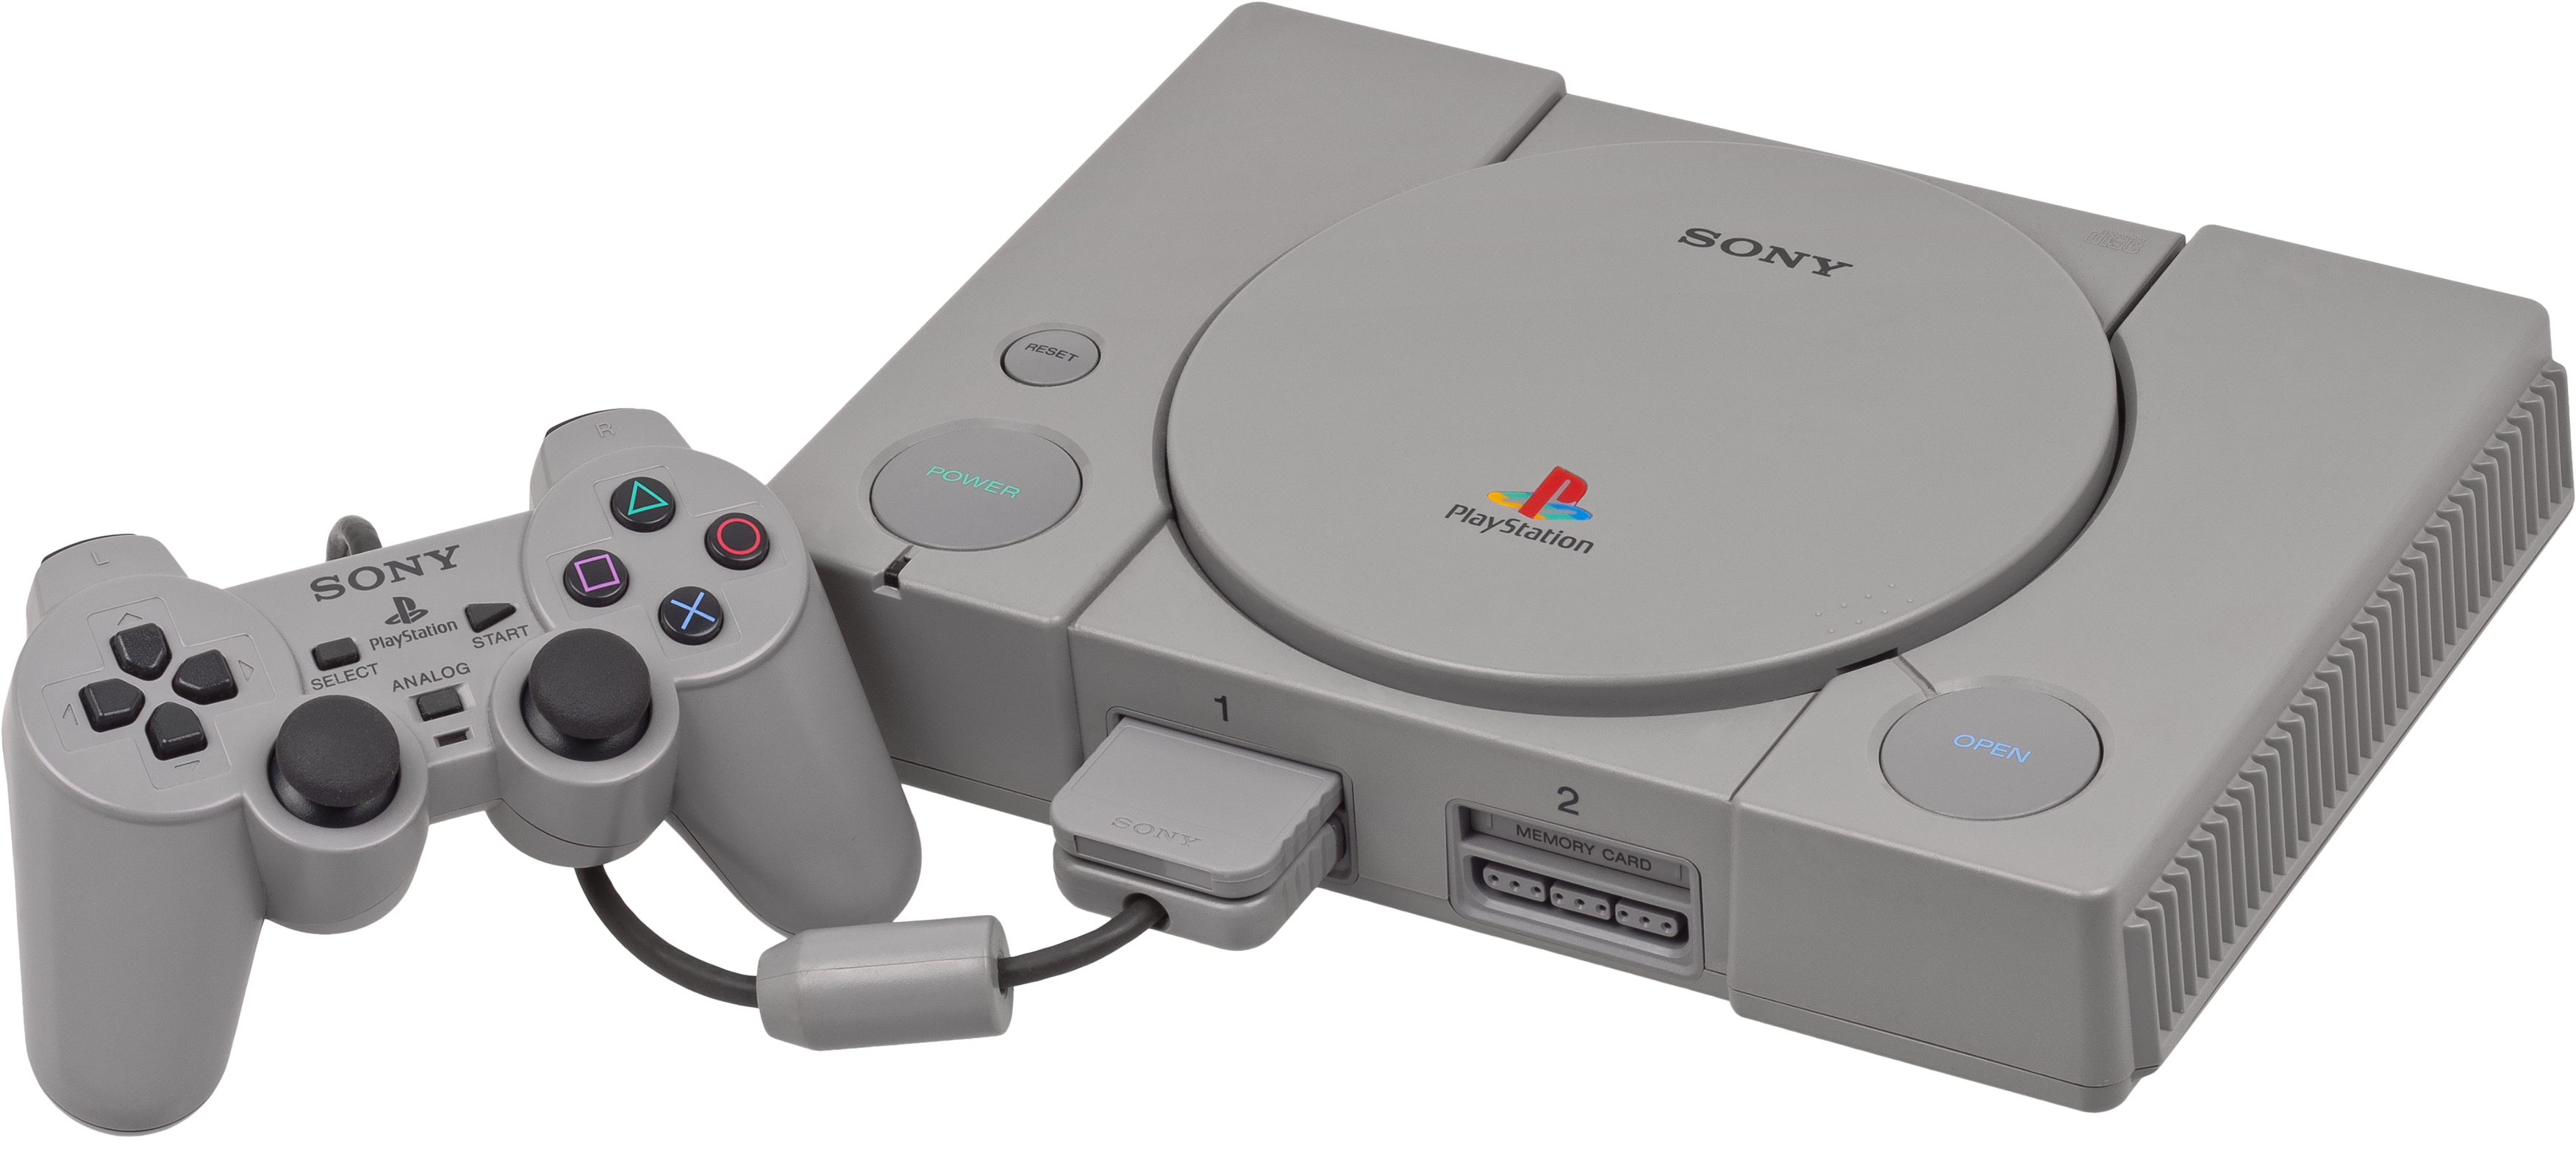 Sony Playstation Png - Playstation, Transparent background PNG HD thumbnail